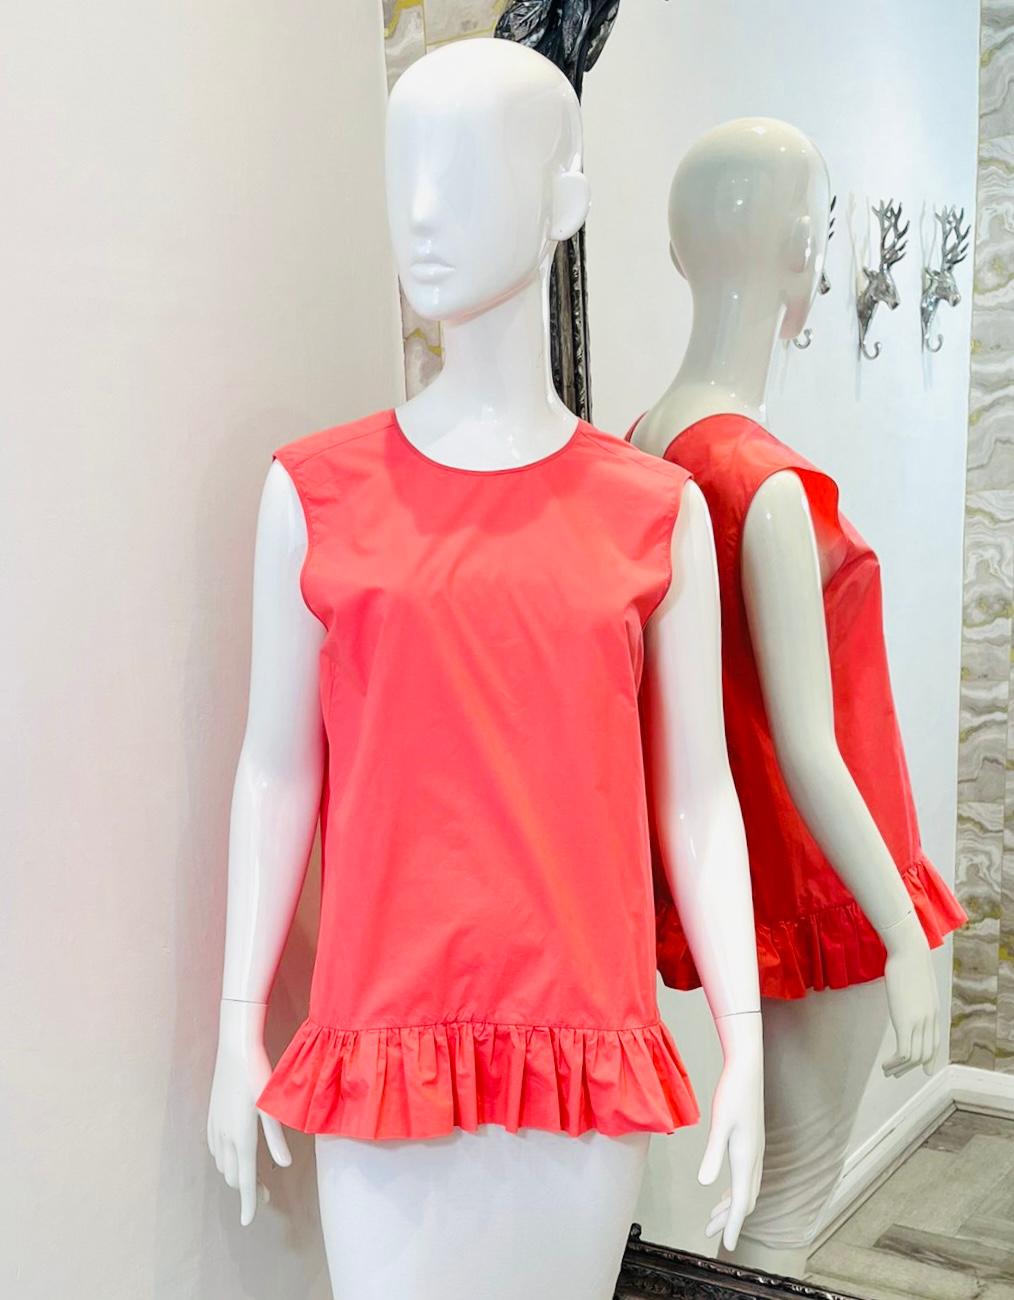 Marni Ruffle Detail Cotton Top

Coral sleeveless blouse designed with ruffle trimmed hem.

Featuring relaxed fit, round neckline to the front and V-Neck to rear.

Size – 44IT

Condition – Very Good

Composition – 100% Cotton